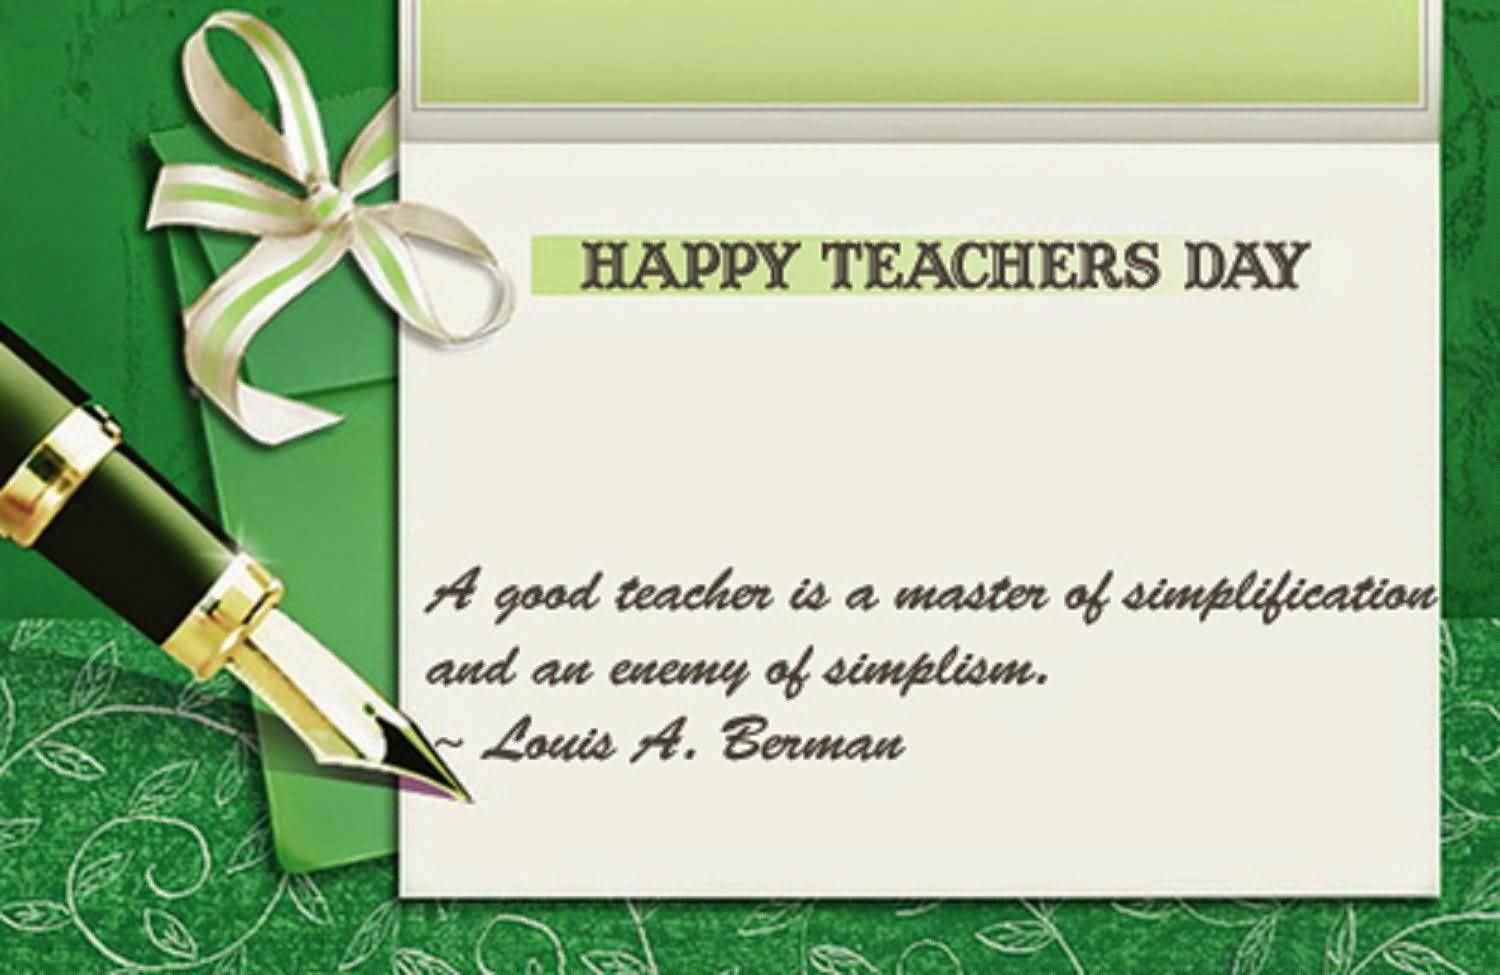 2019} Happy Teachers Day Image, Picture, Photo and Wallpaper